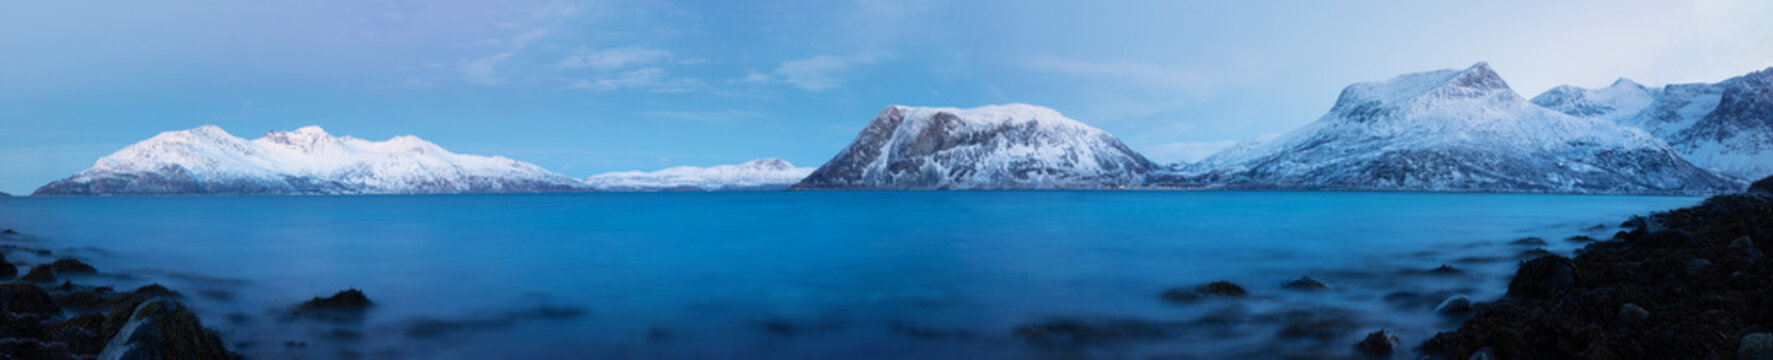 Beautiful panoramic view of fjord and mountains near Tromso, Norway